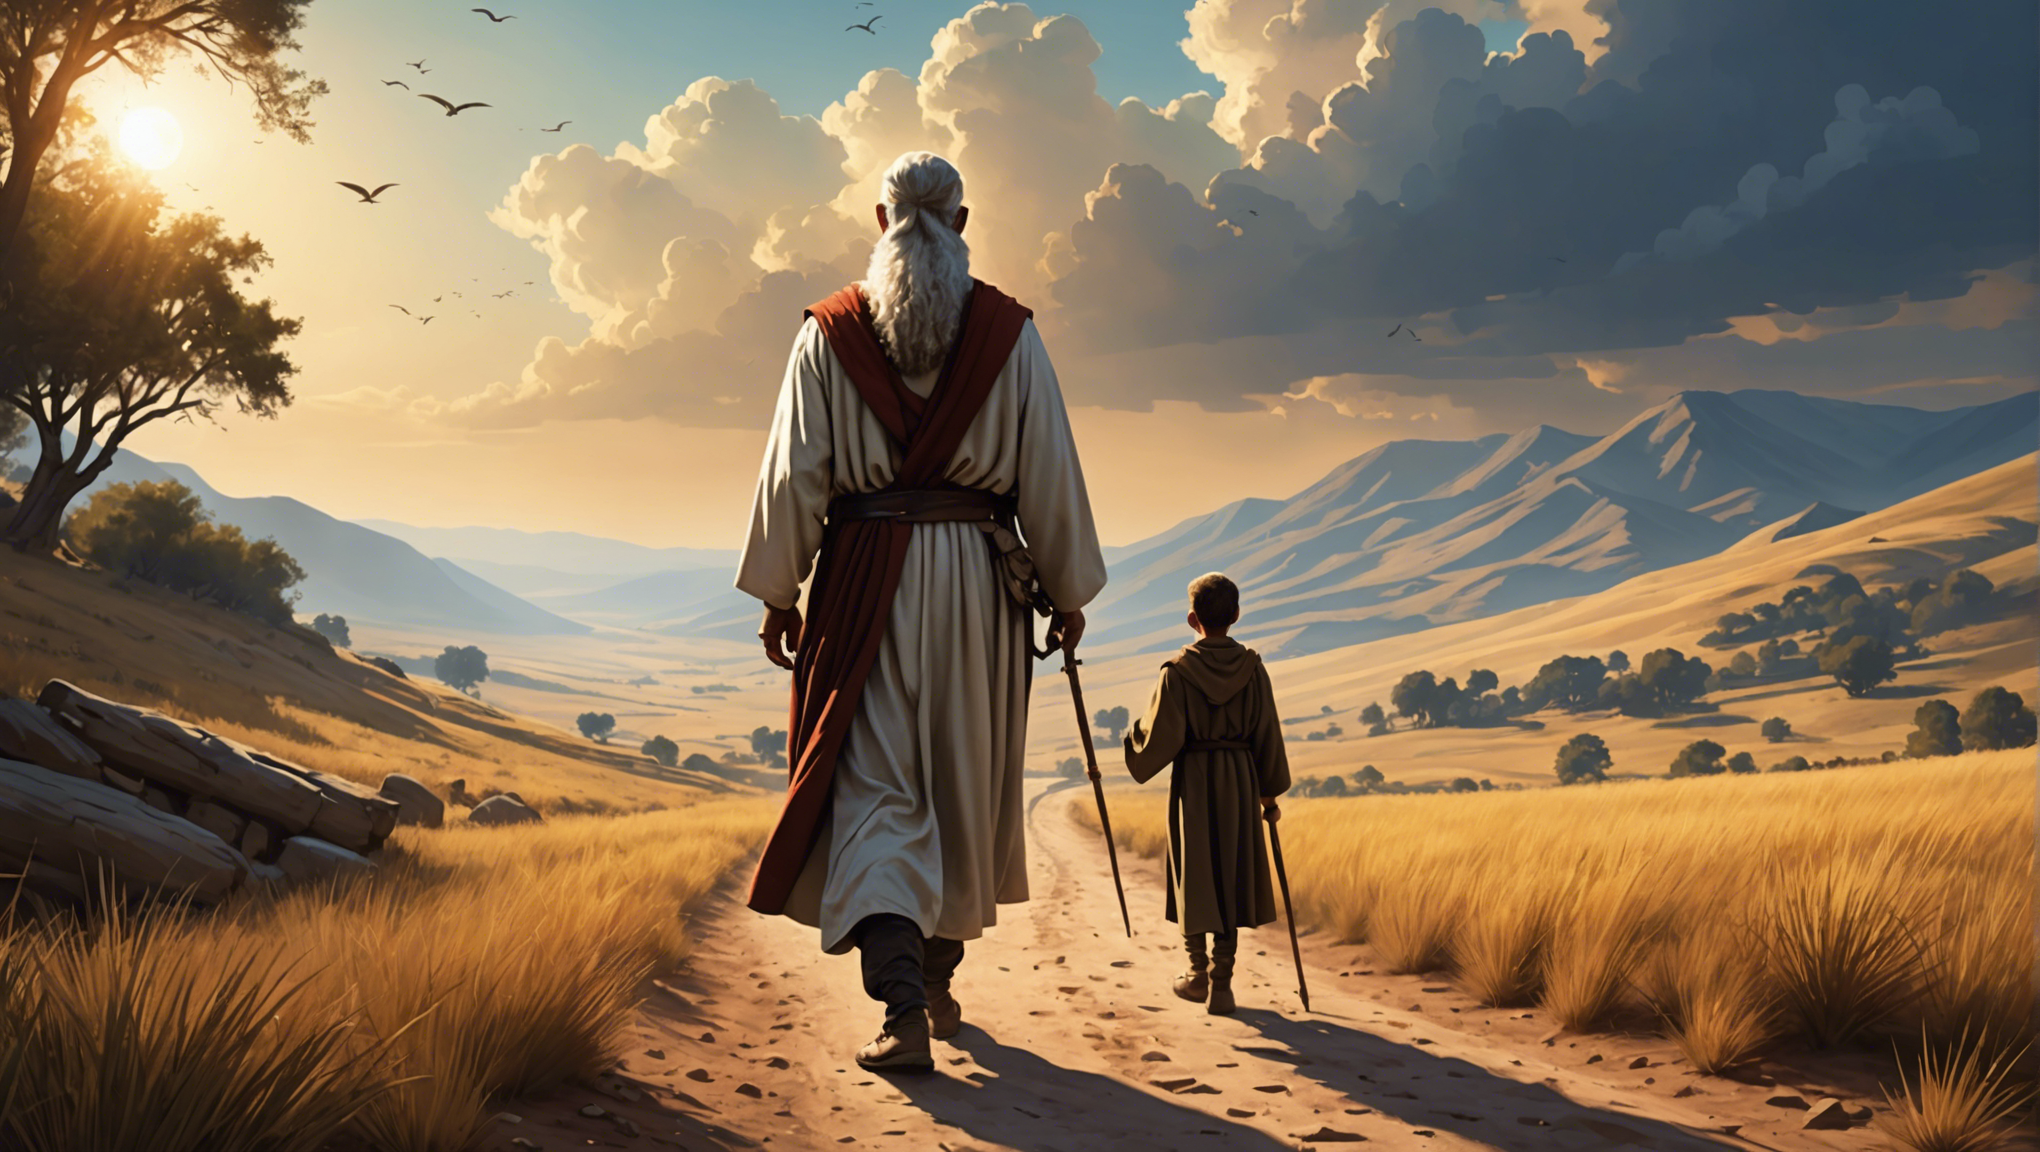 explore the profound lessons on the journey of faith from abraham's legacy. gain insight and inspiration from his remarkable story.